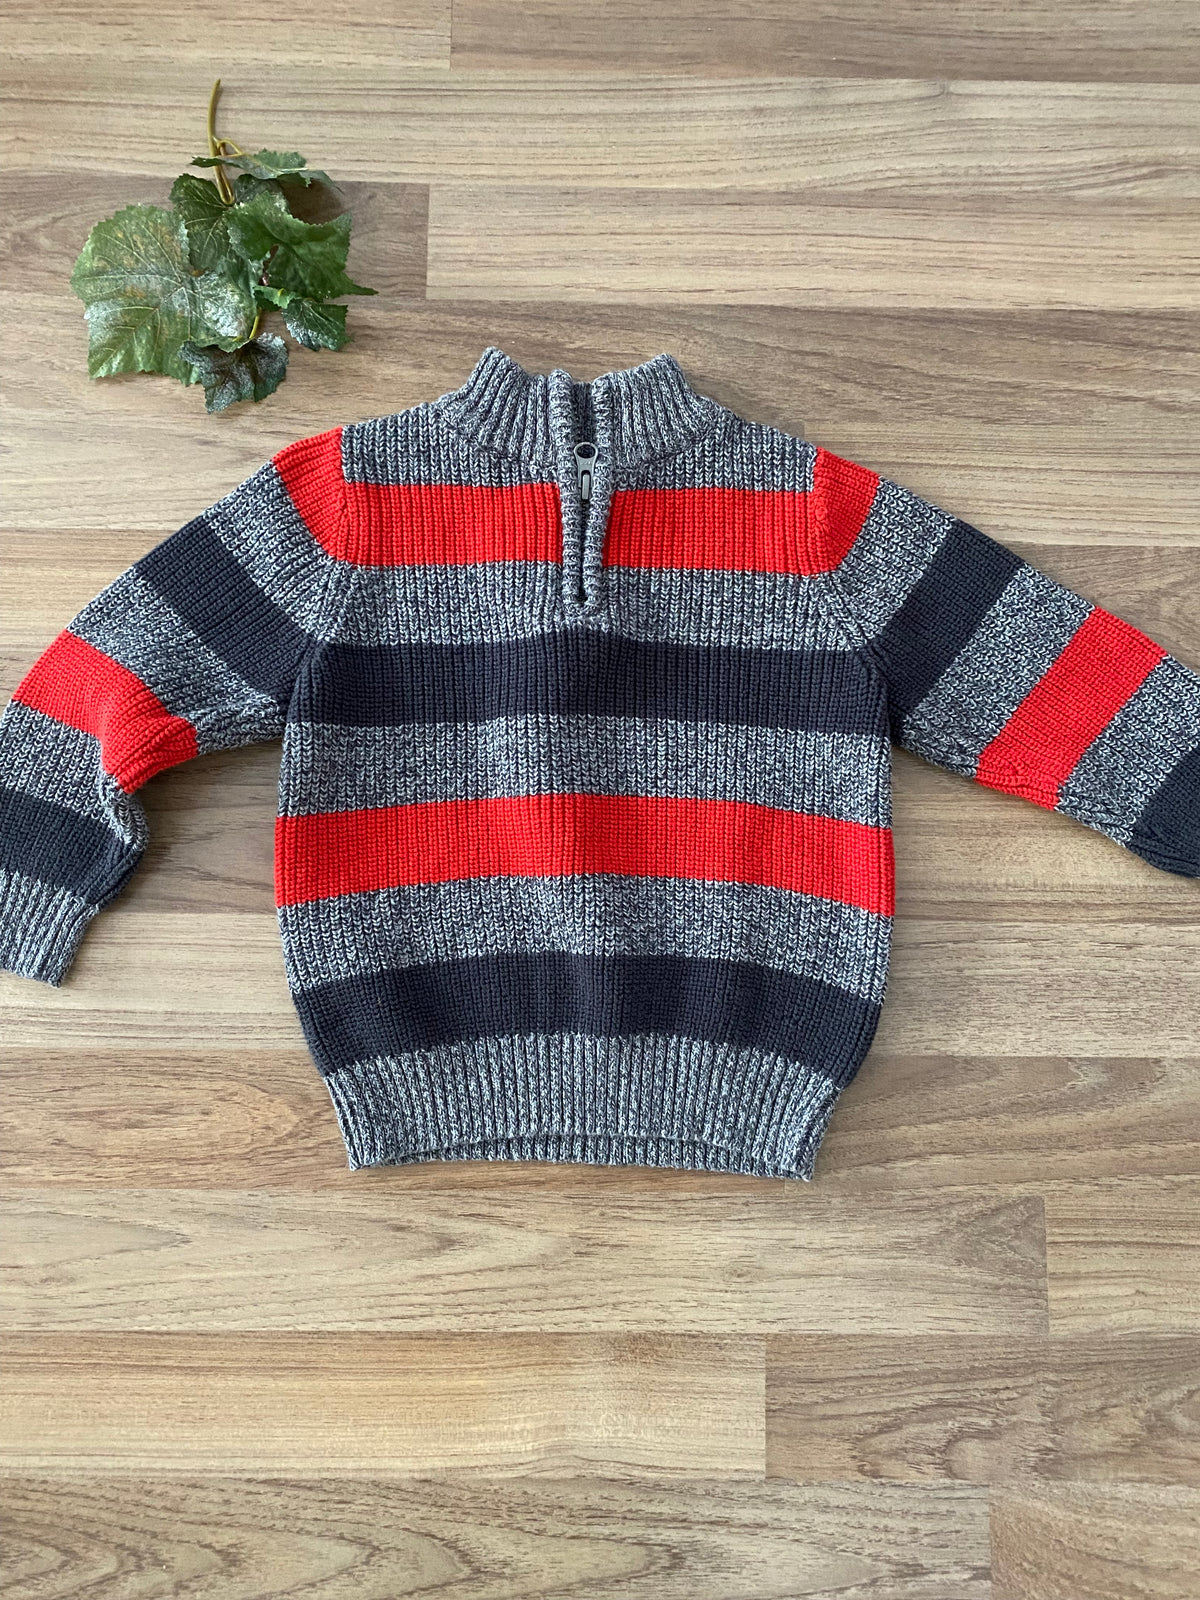 Pullover Sweater (Boys Size 3)